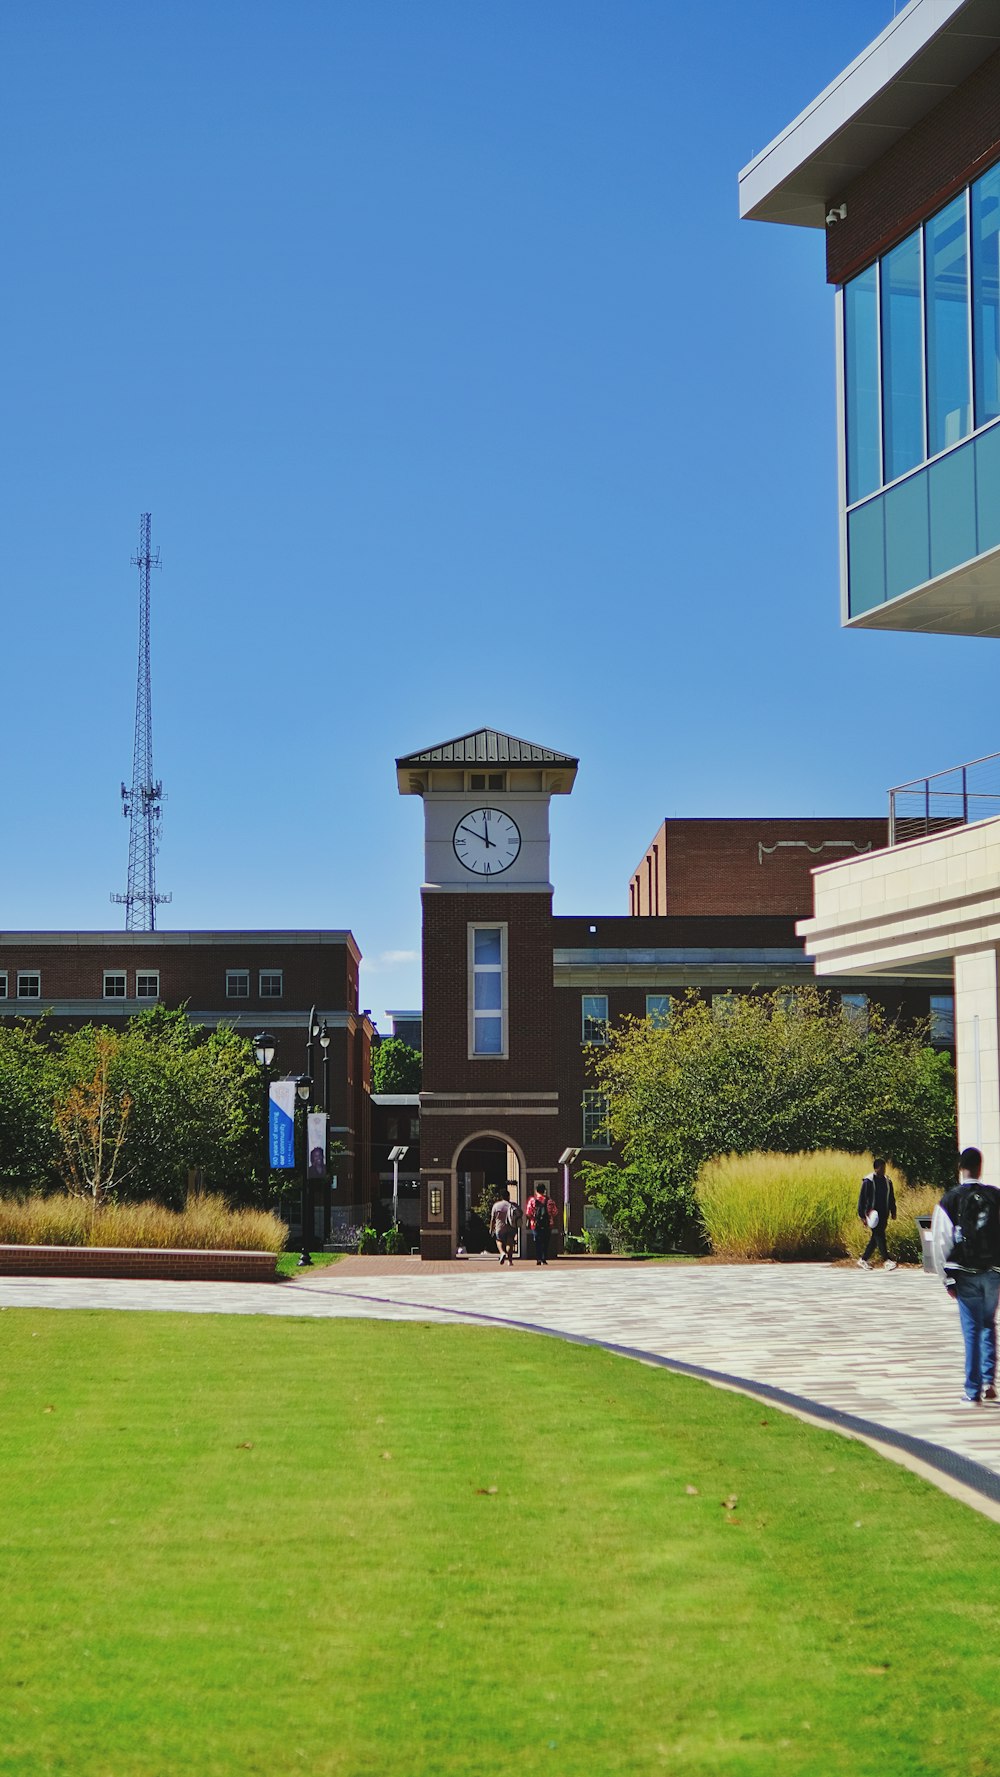 a clock tower in the middle of a grassy area